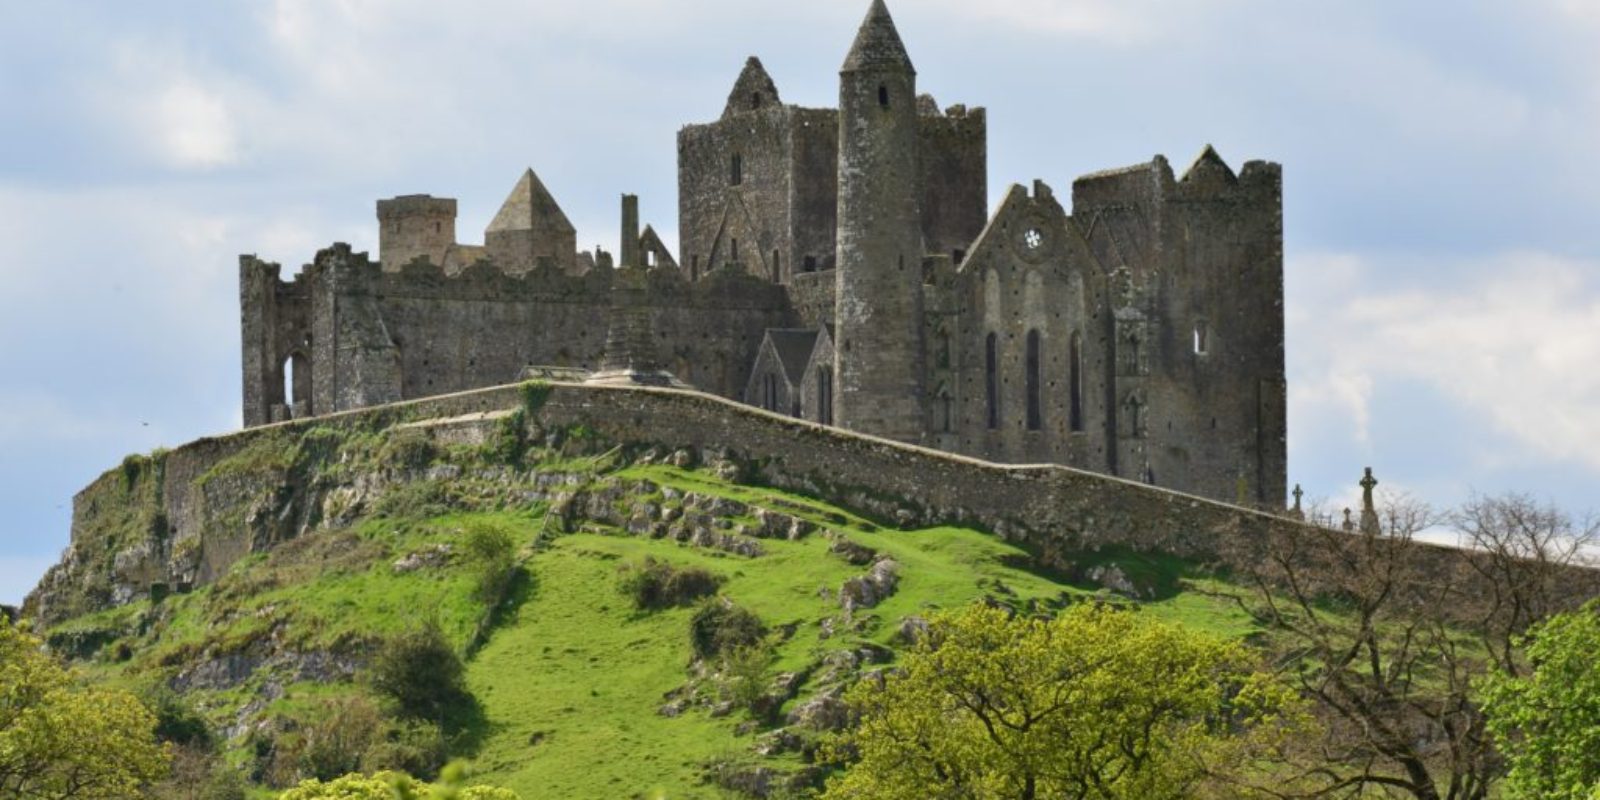 The myths and legends of Ireland's Ancient East are steeped in millennia of history. The rich Celtic heritage, the invading Vikings, Normans, and English...